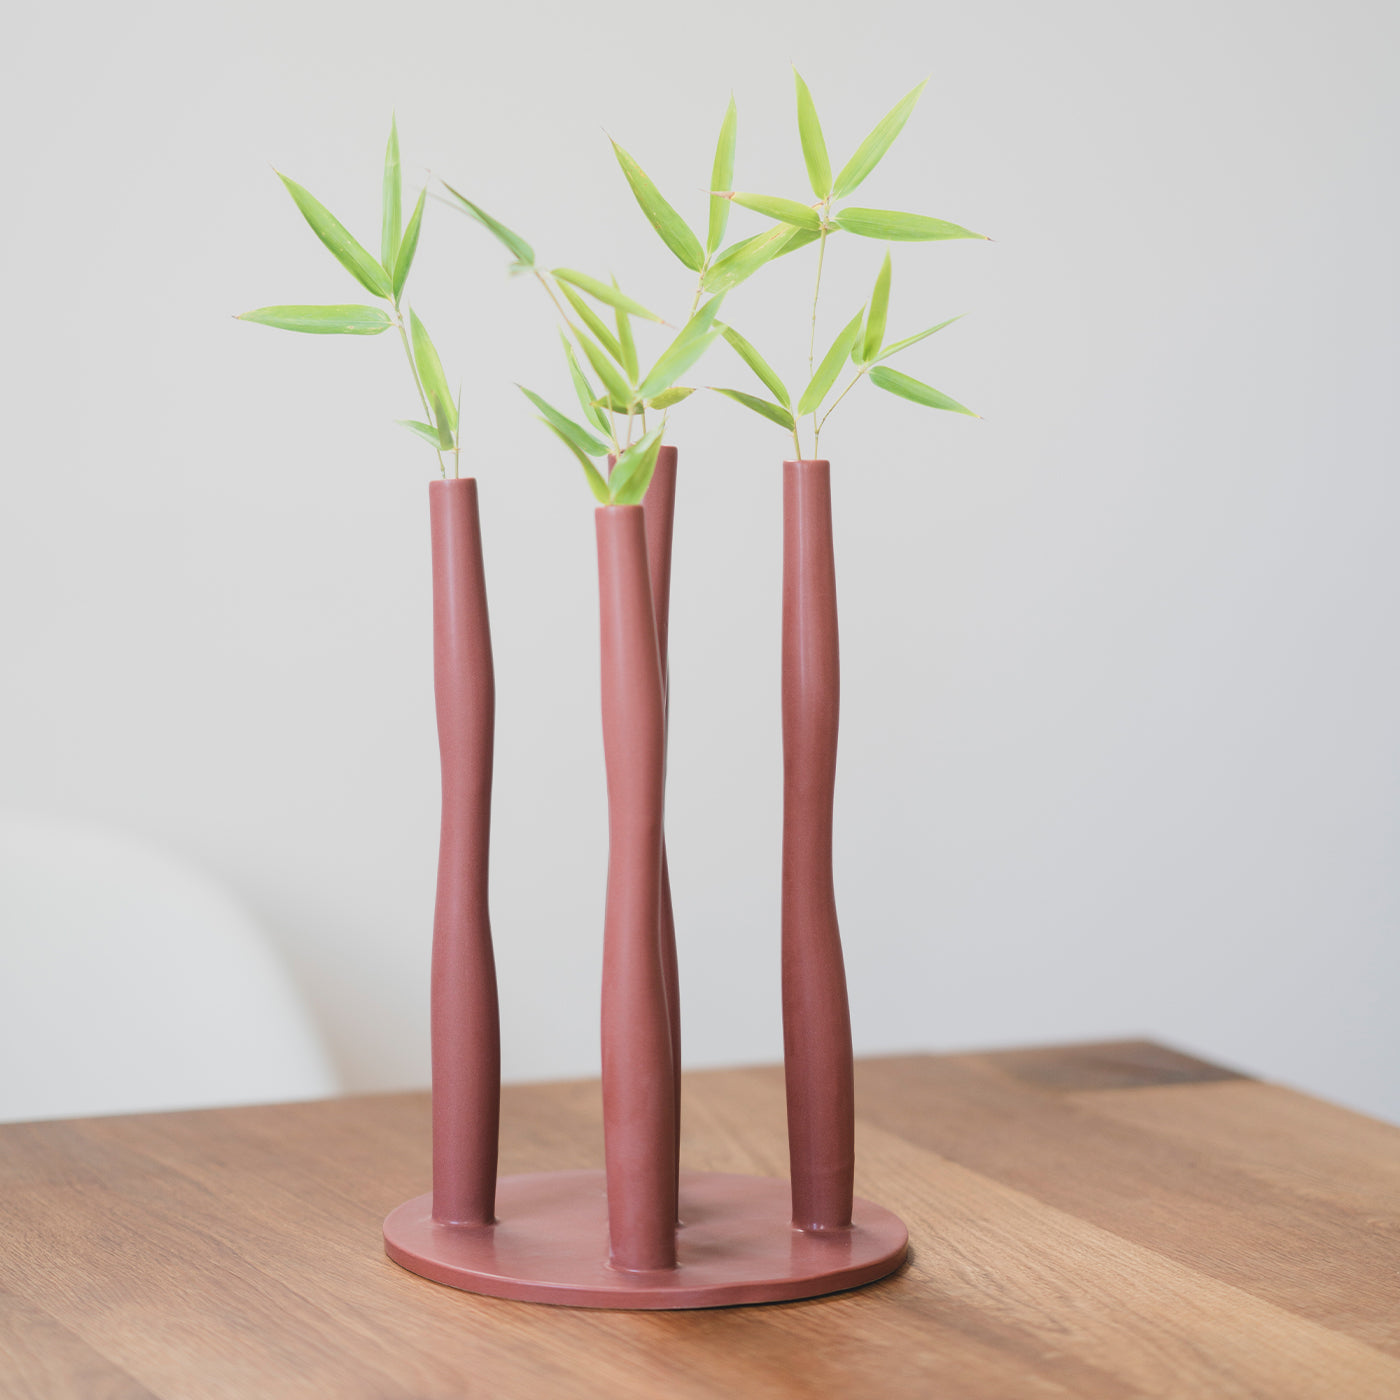 Red Round Bamboo Forest vase - Alternative view 1